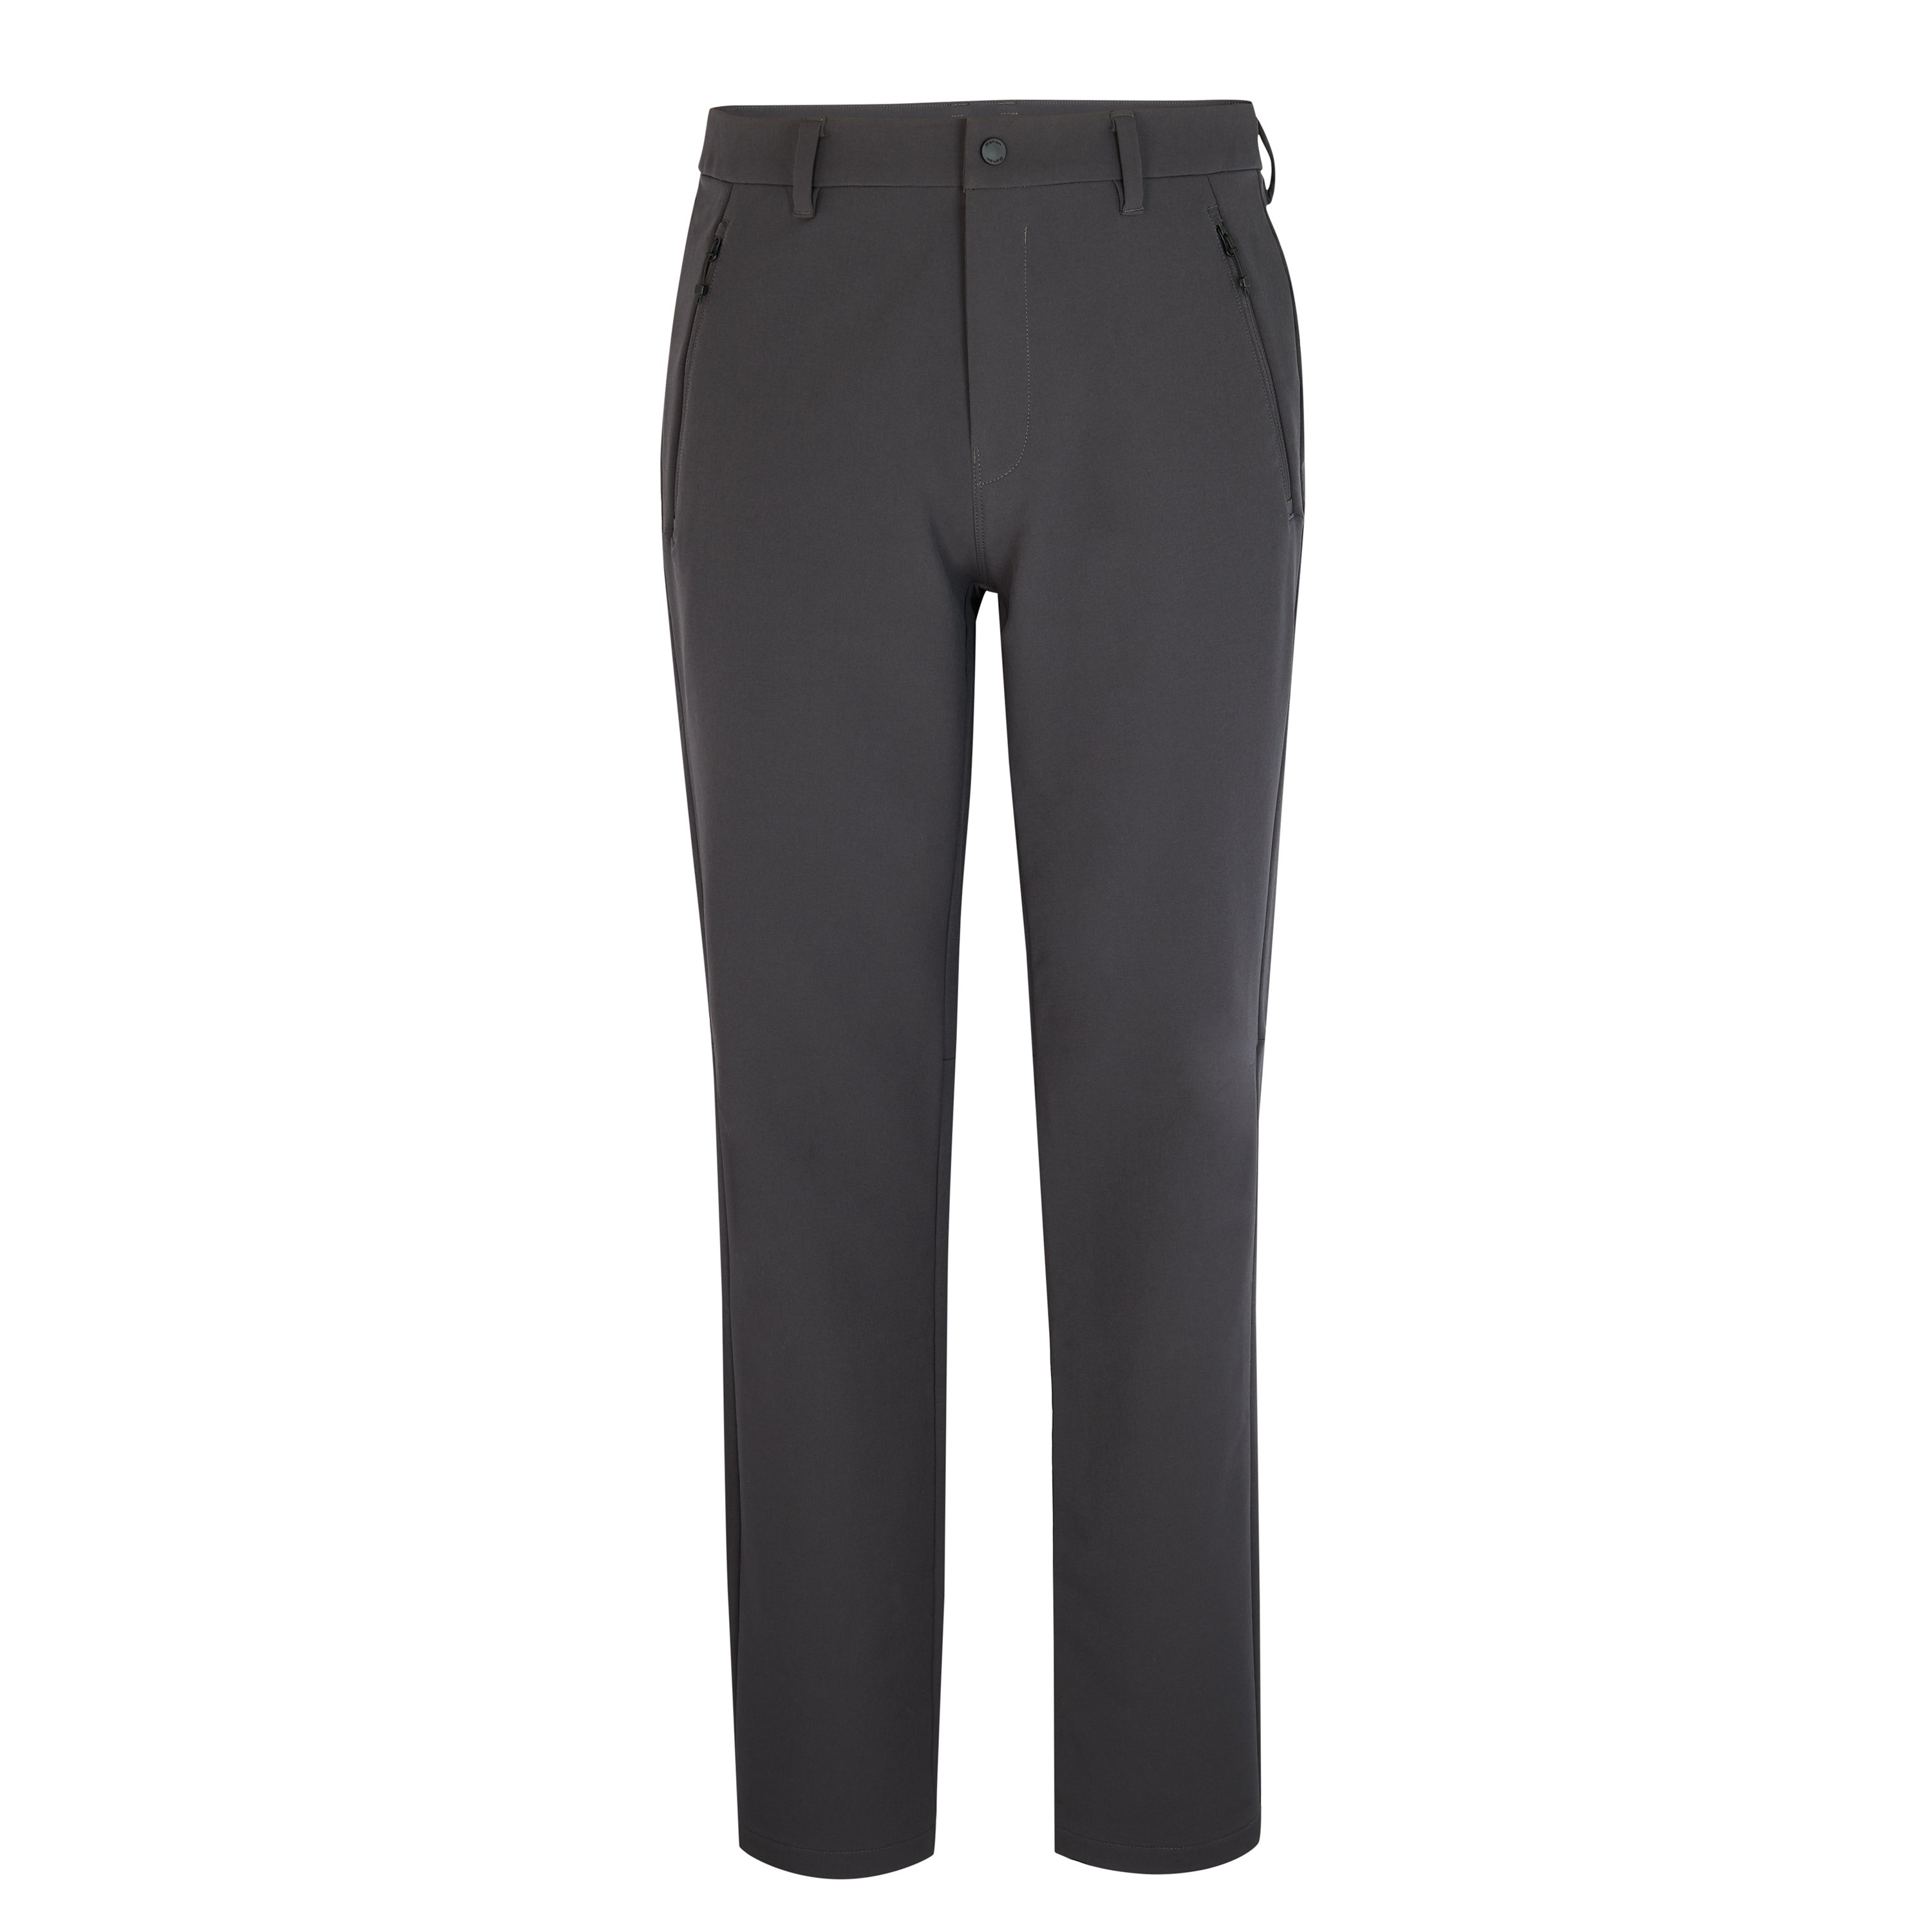 Men's Striders Hiking Trousers